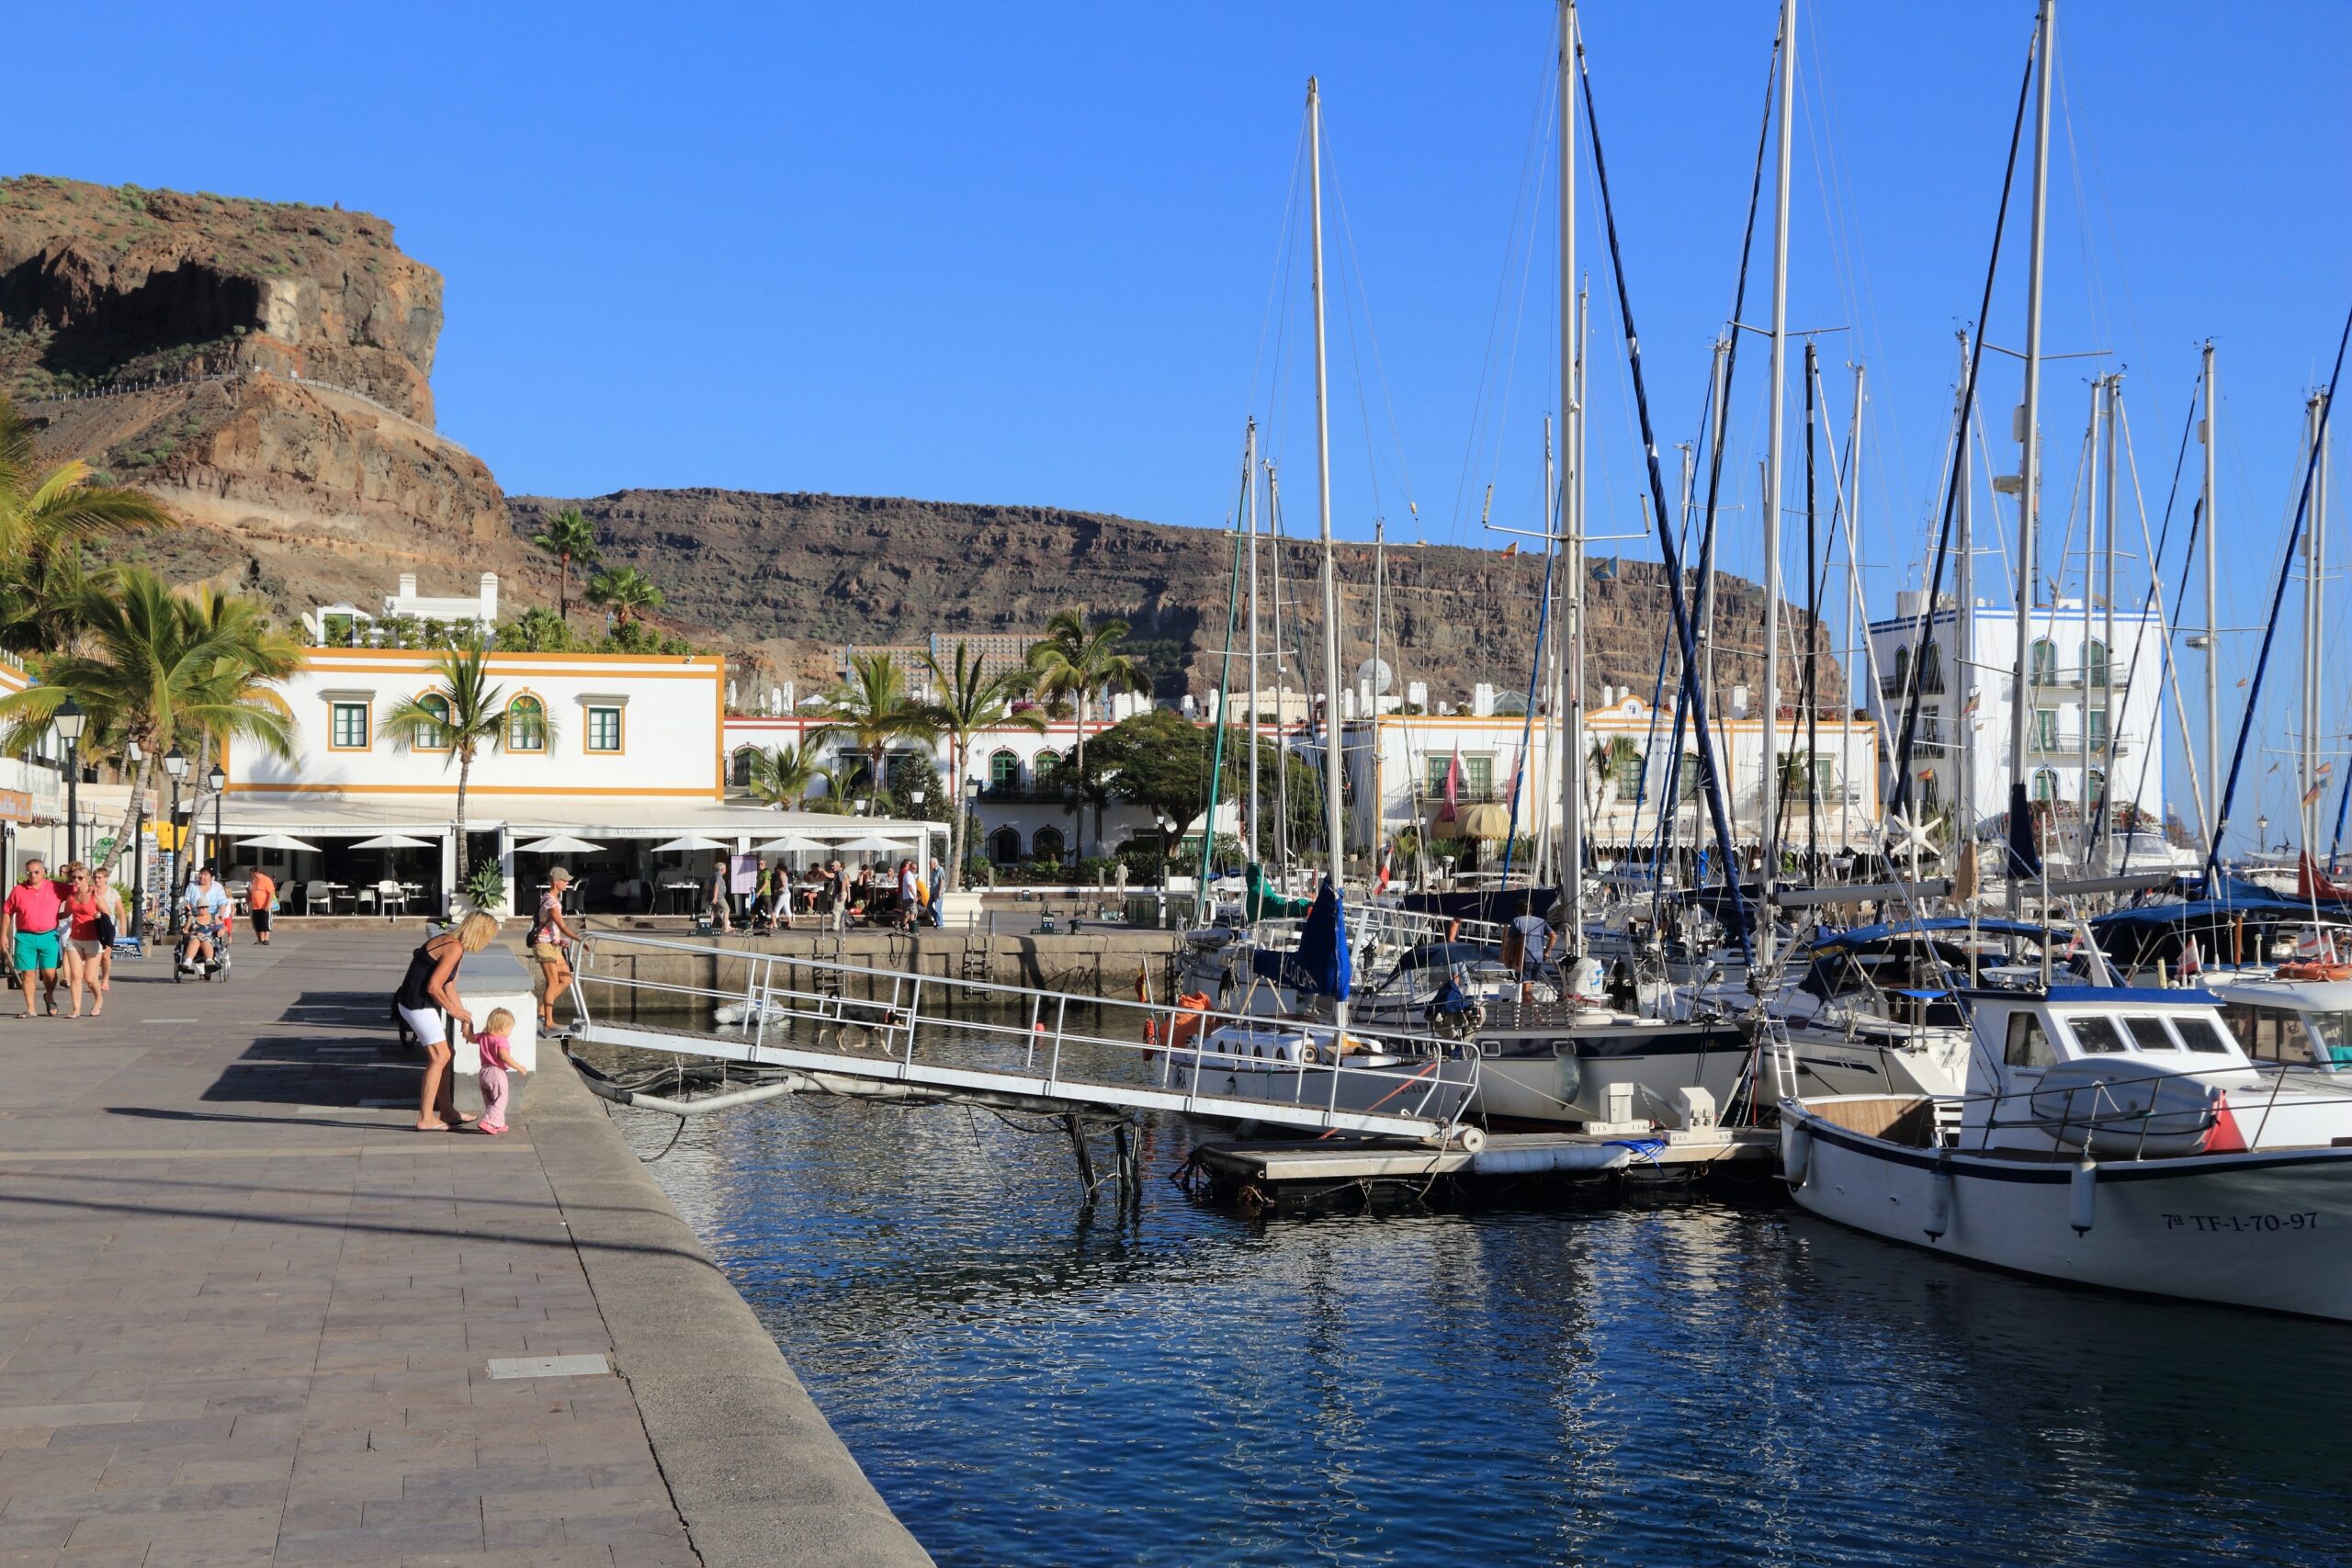 to show the beautiful marinas where we will stop while cruising the canary islands on a sailing yacht